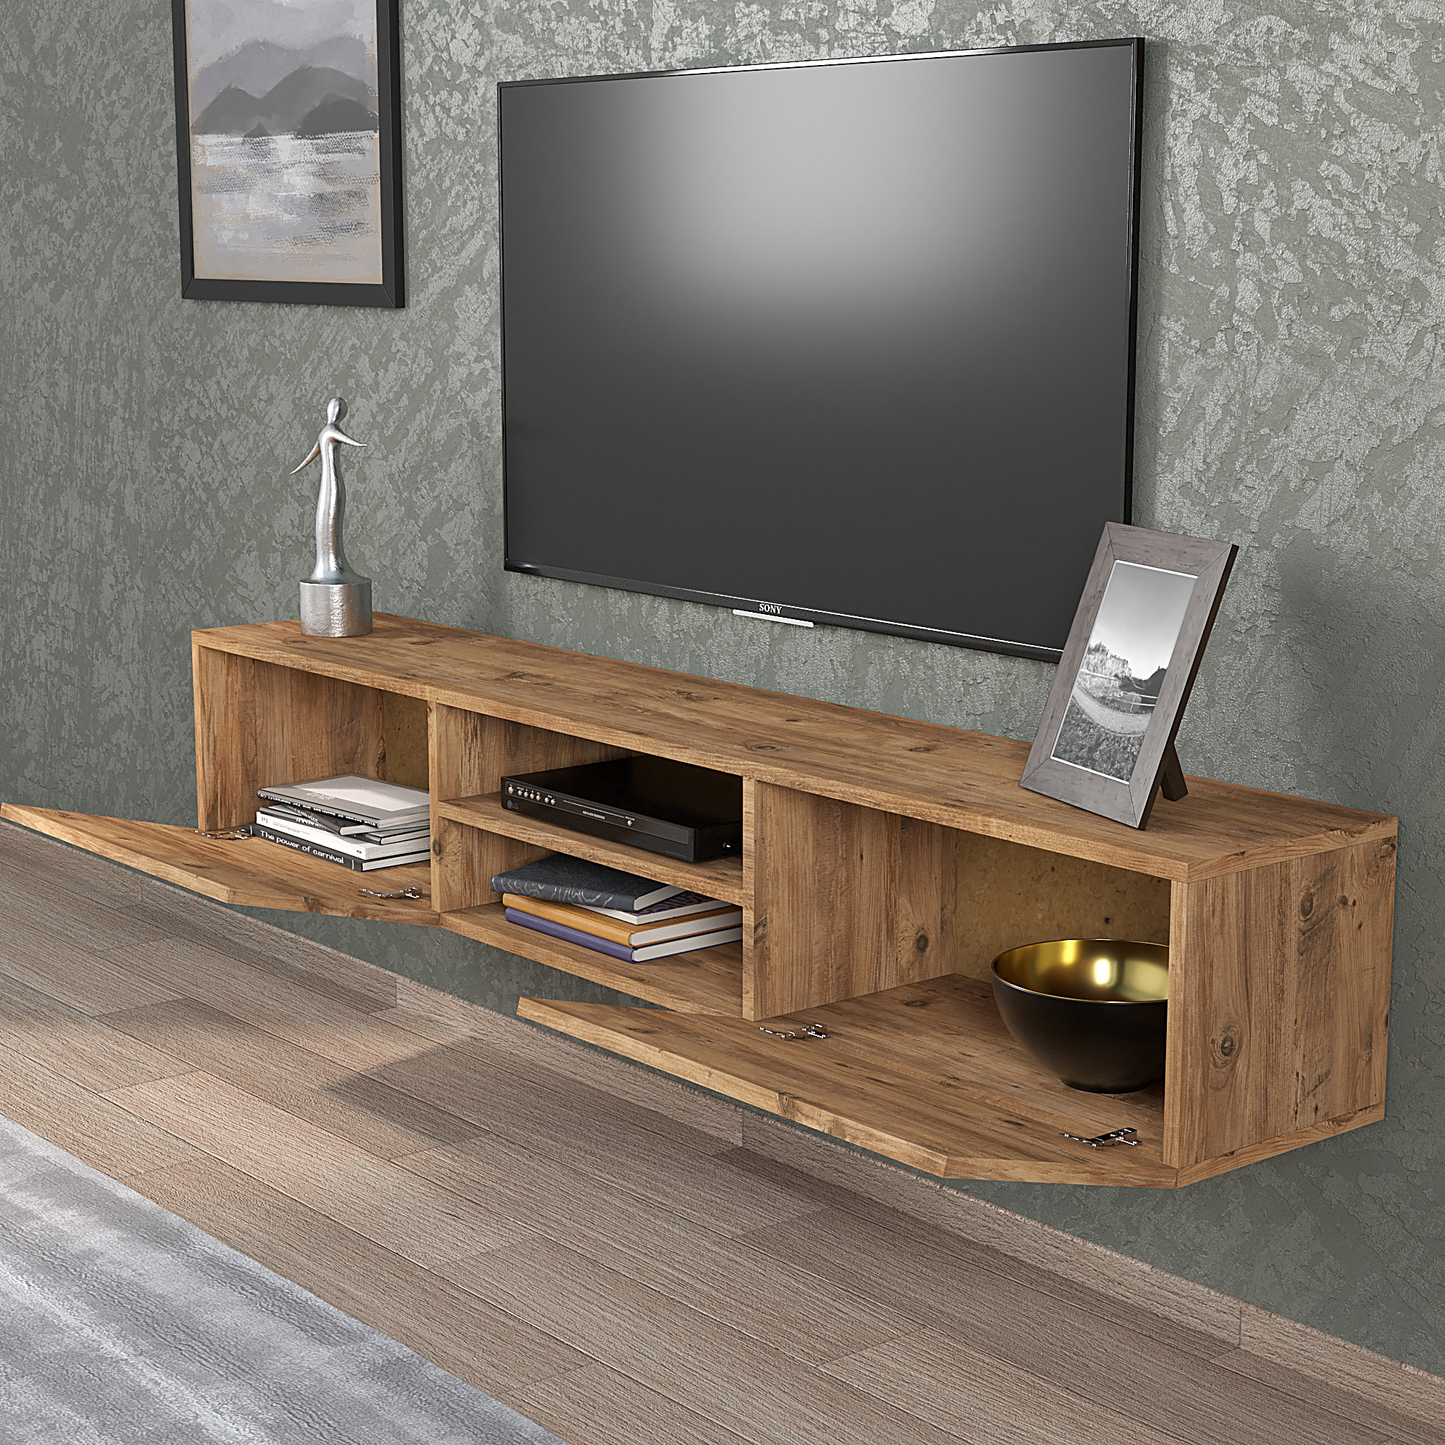 Otranto Floating TV Stand & Media Console for TVs up to 80" - Atlantic Pine Color